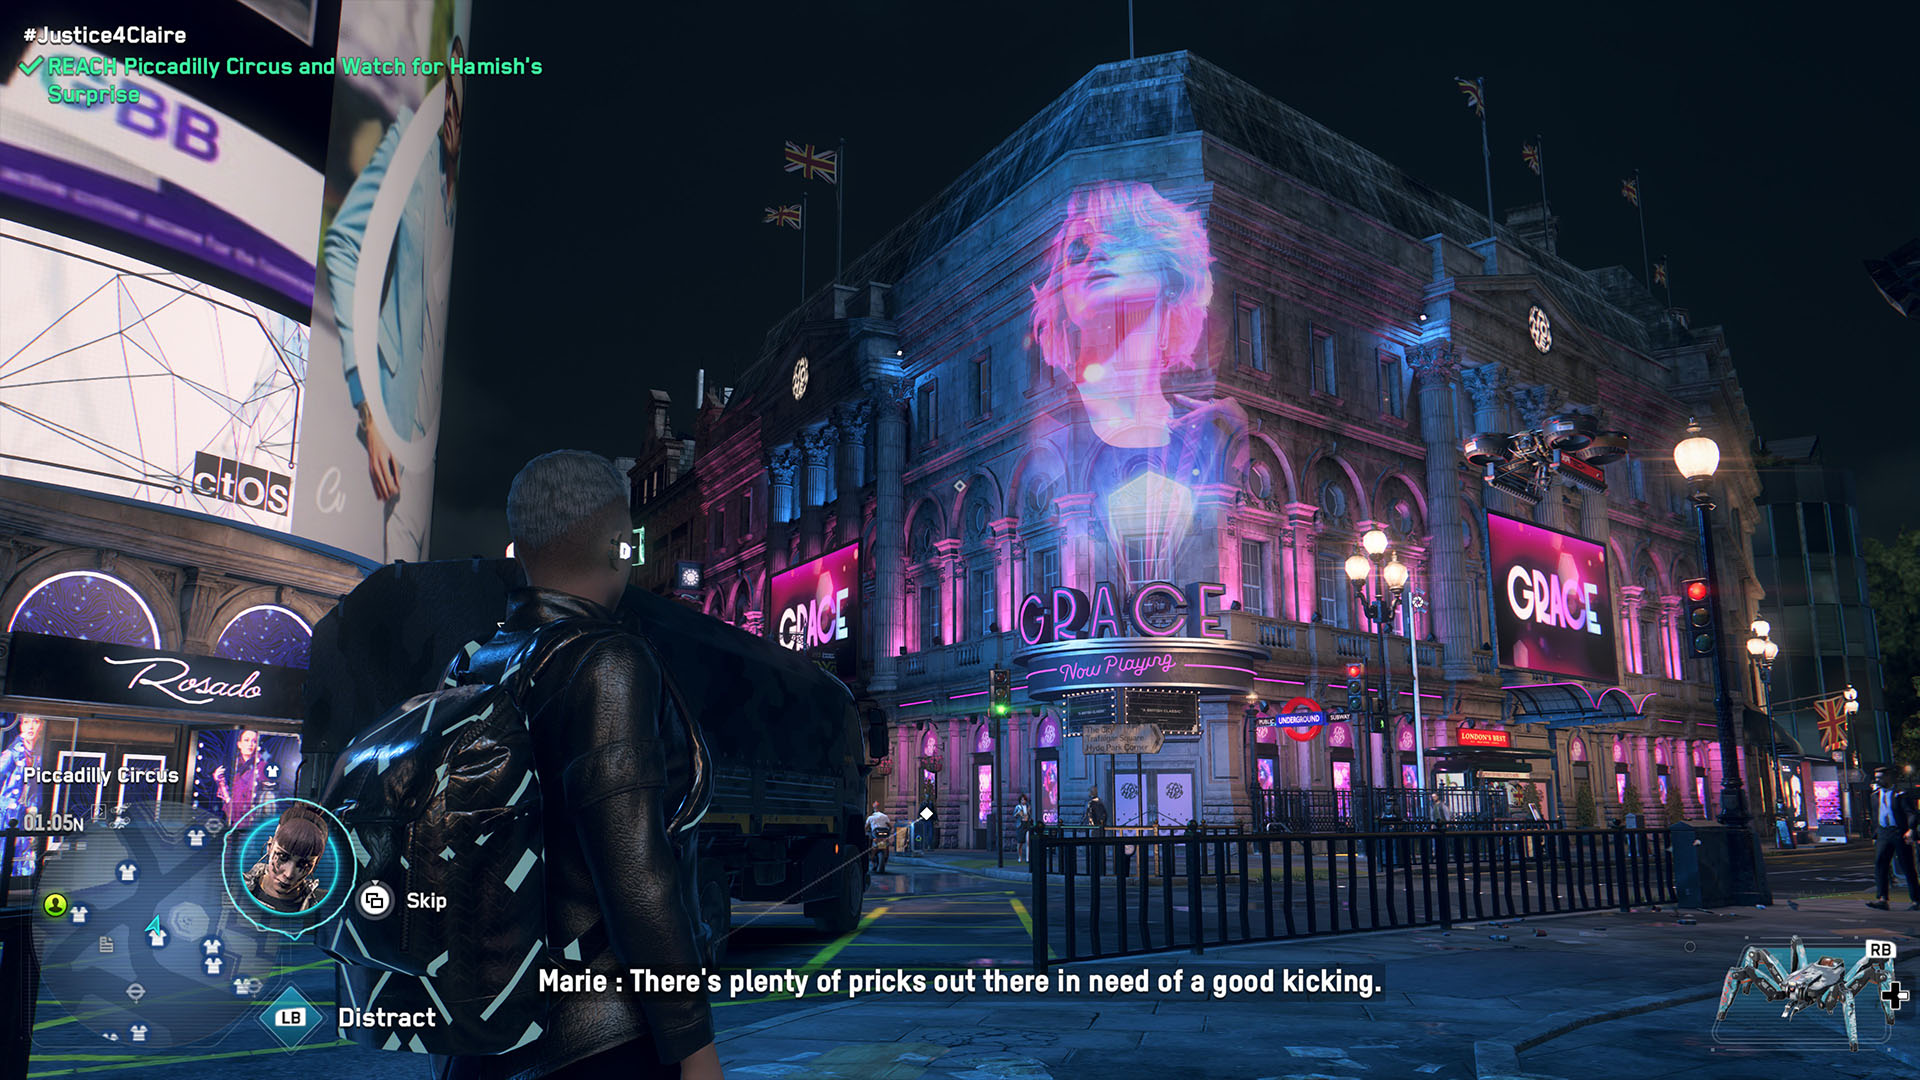 Watch Dogs Legion review – freedom at a cost